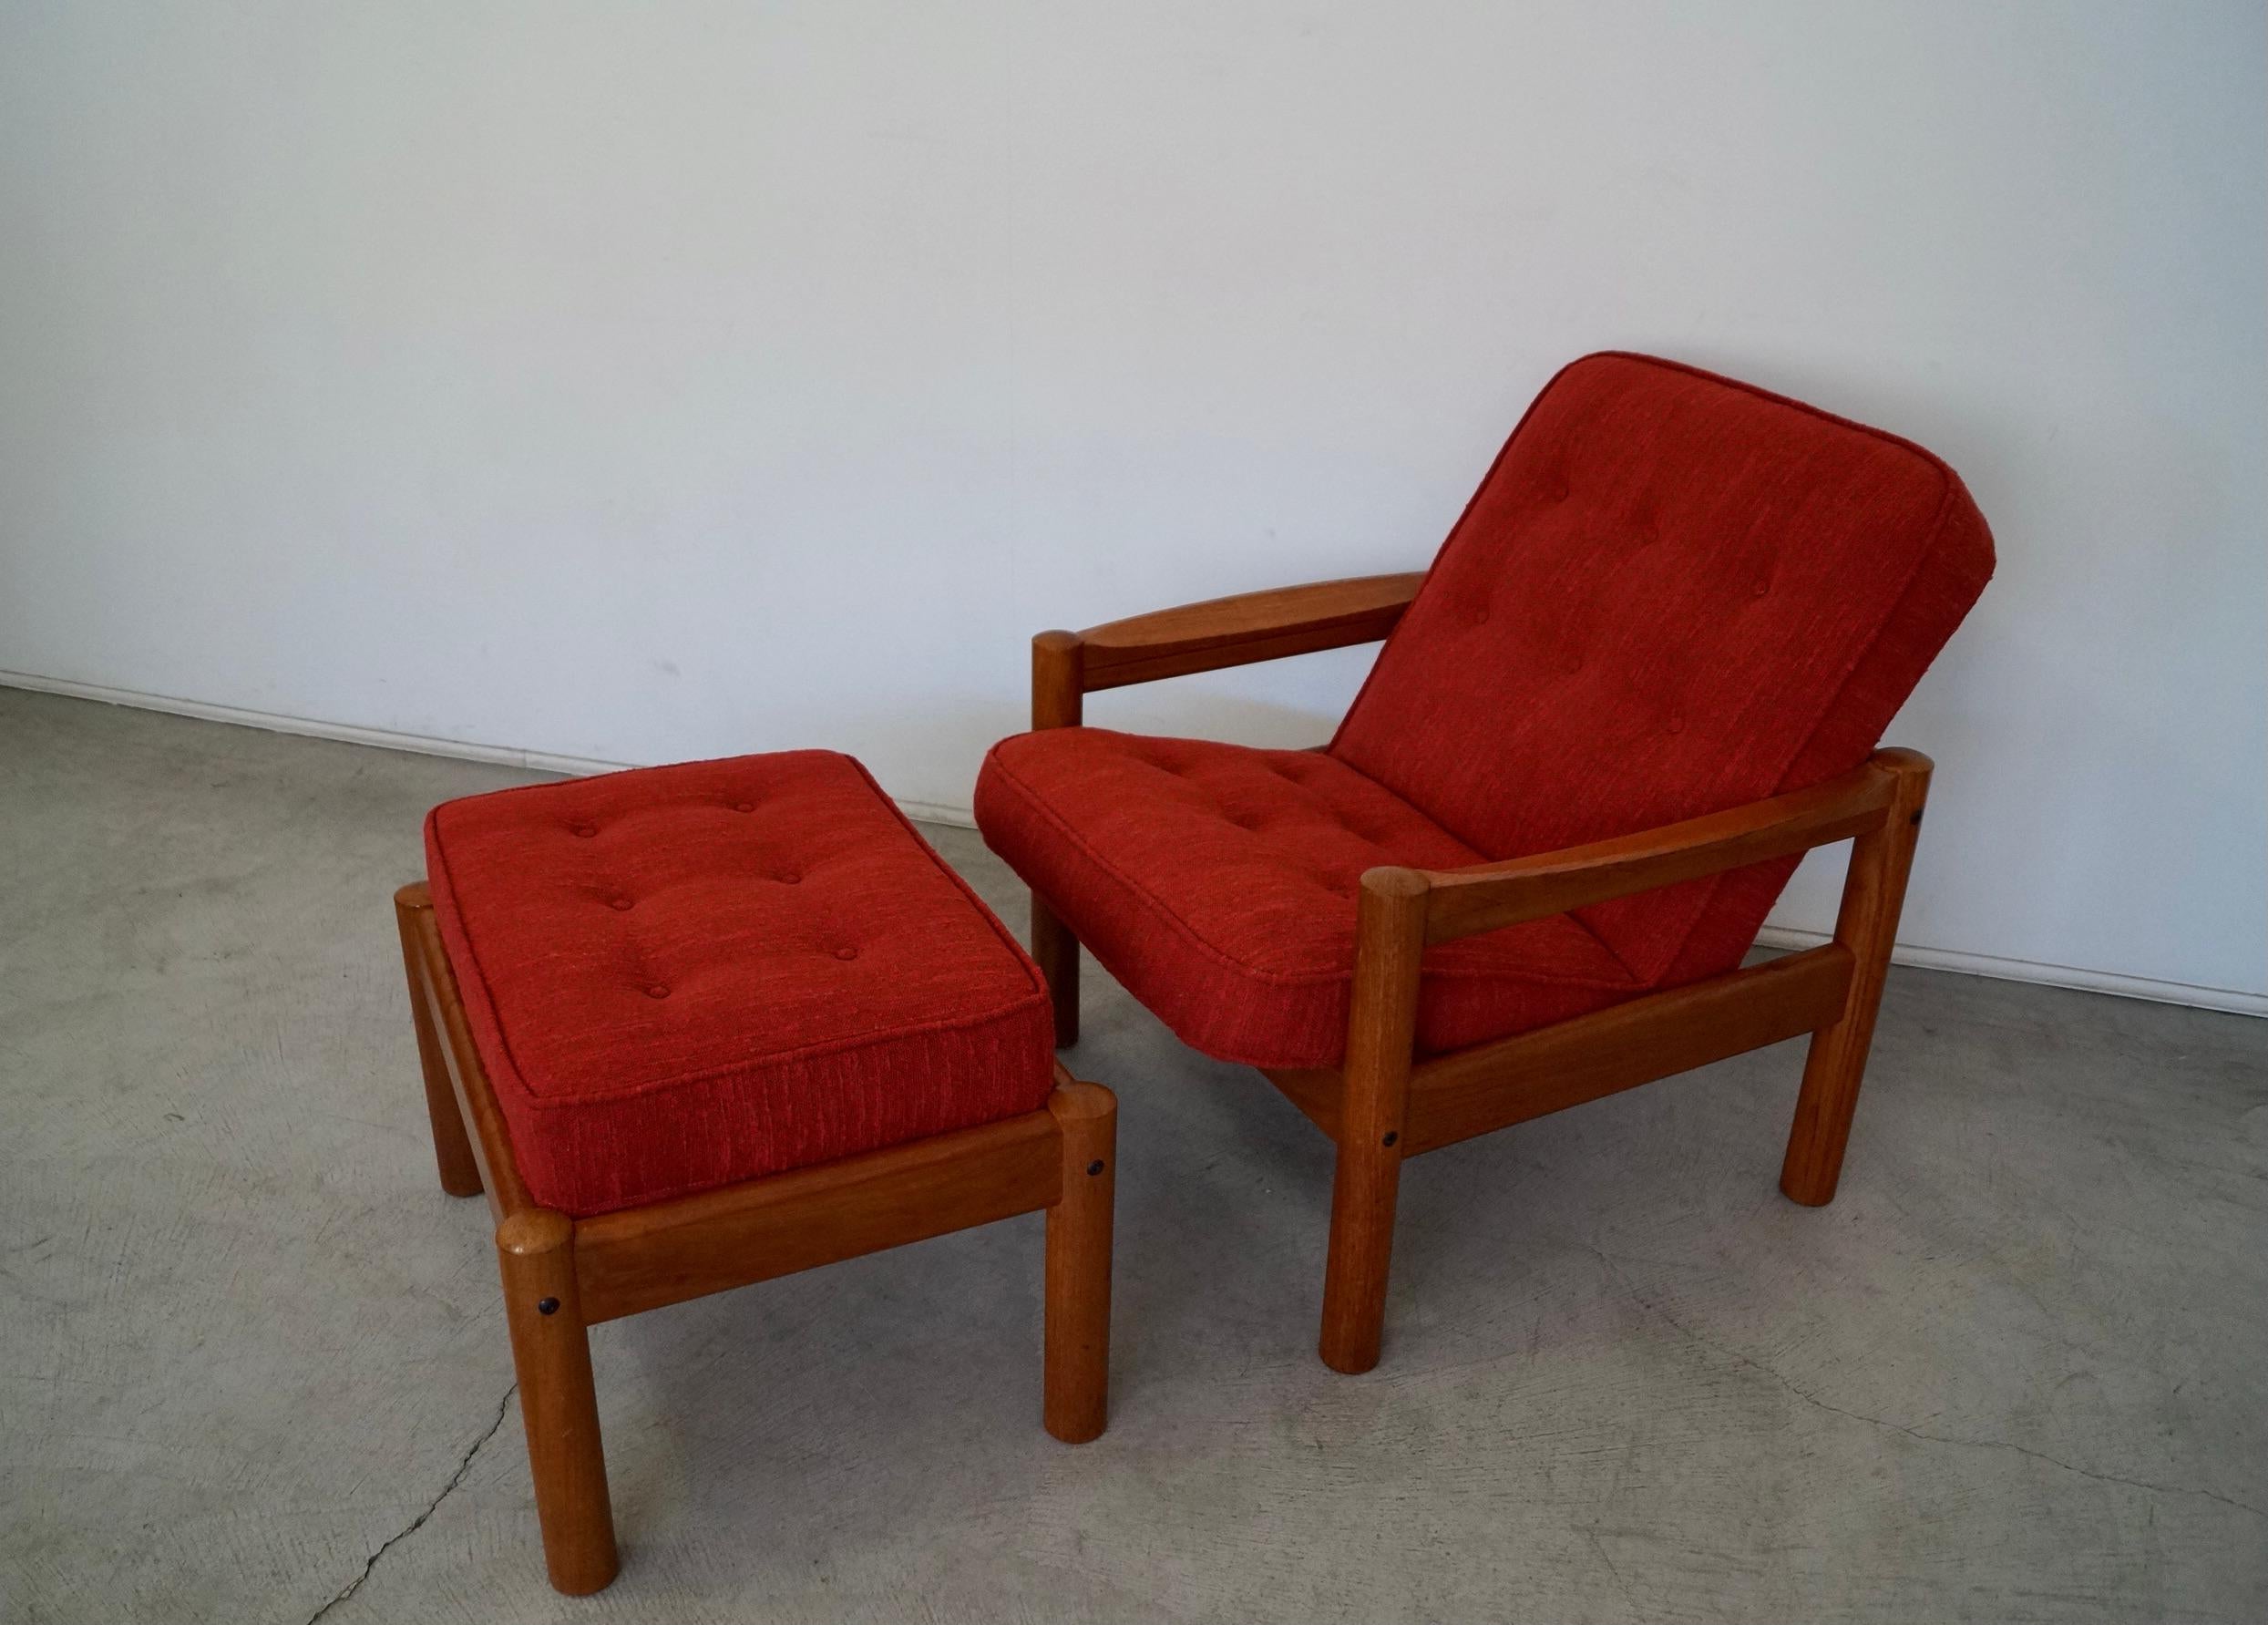 1970's Danish Modern Teak Lounge Chairs by Domino Mobler - a Pair For Sale 6